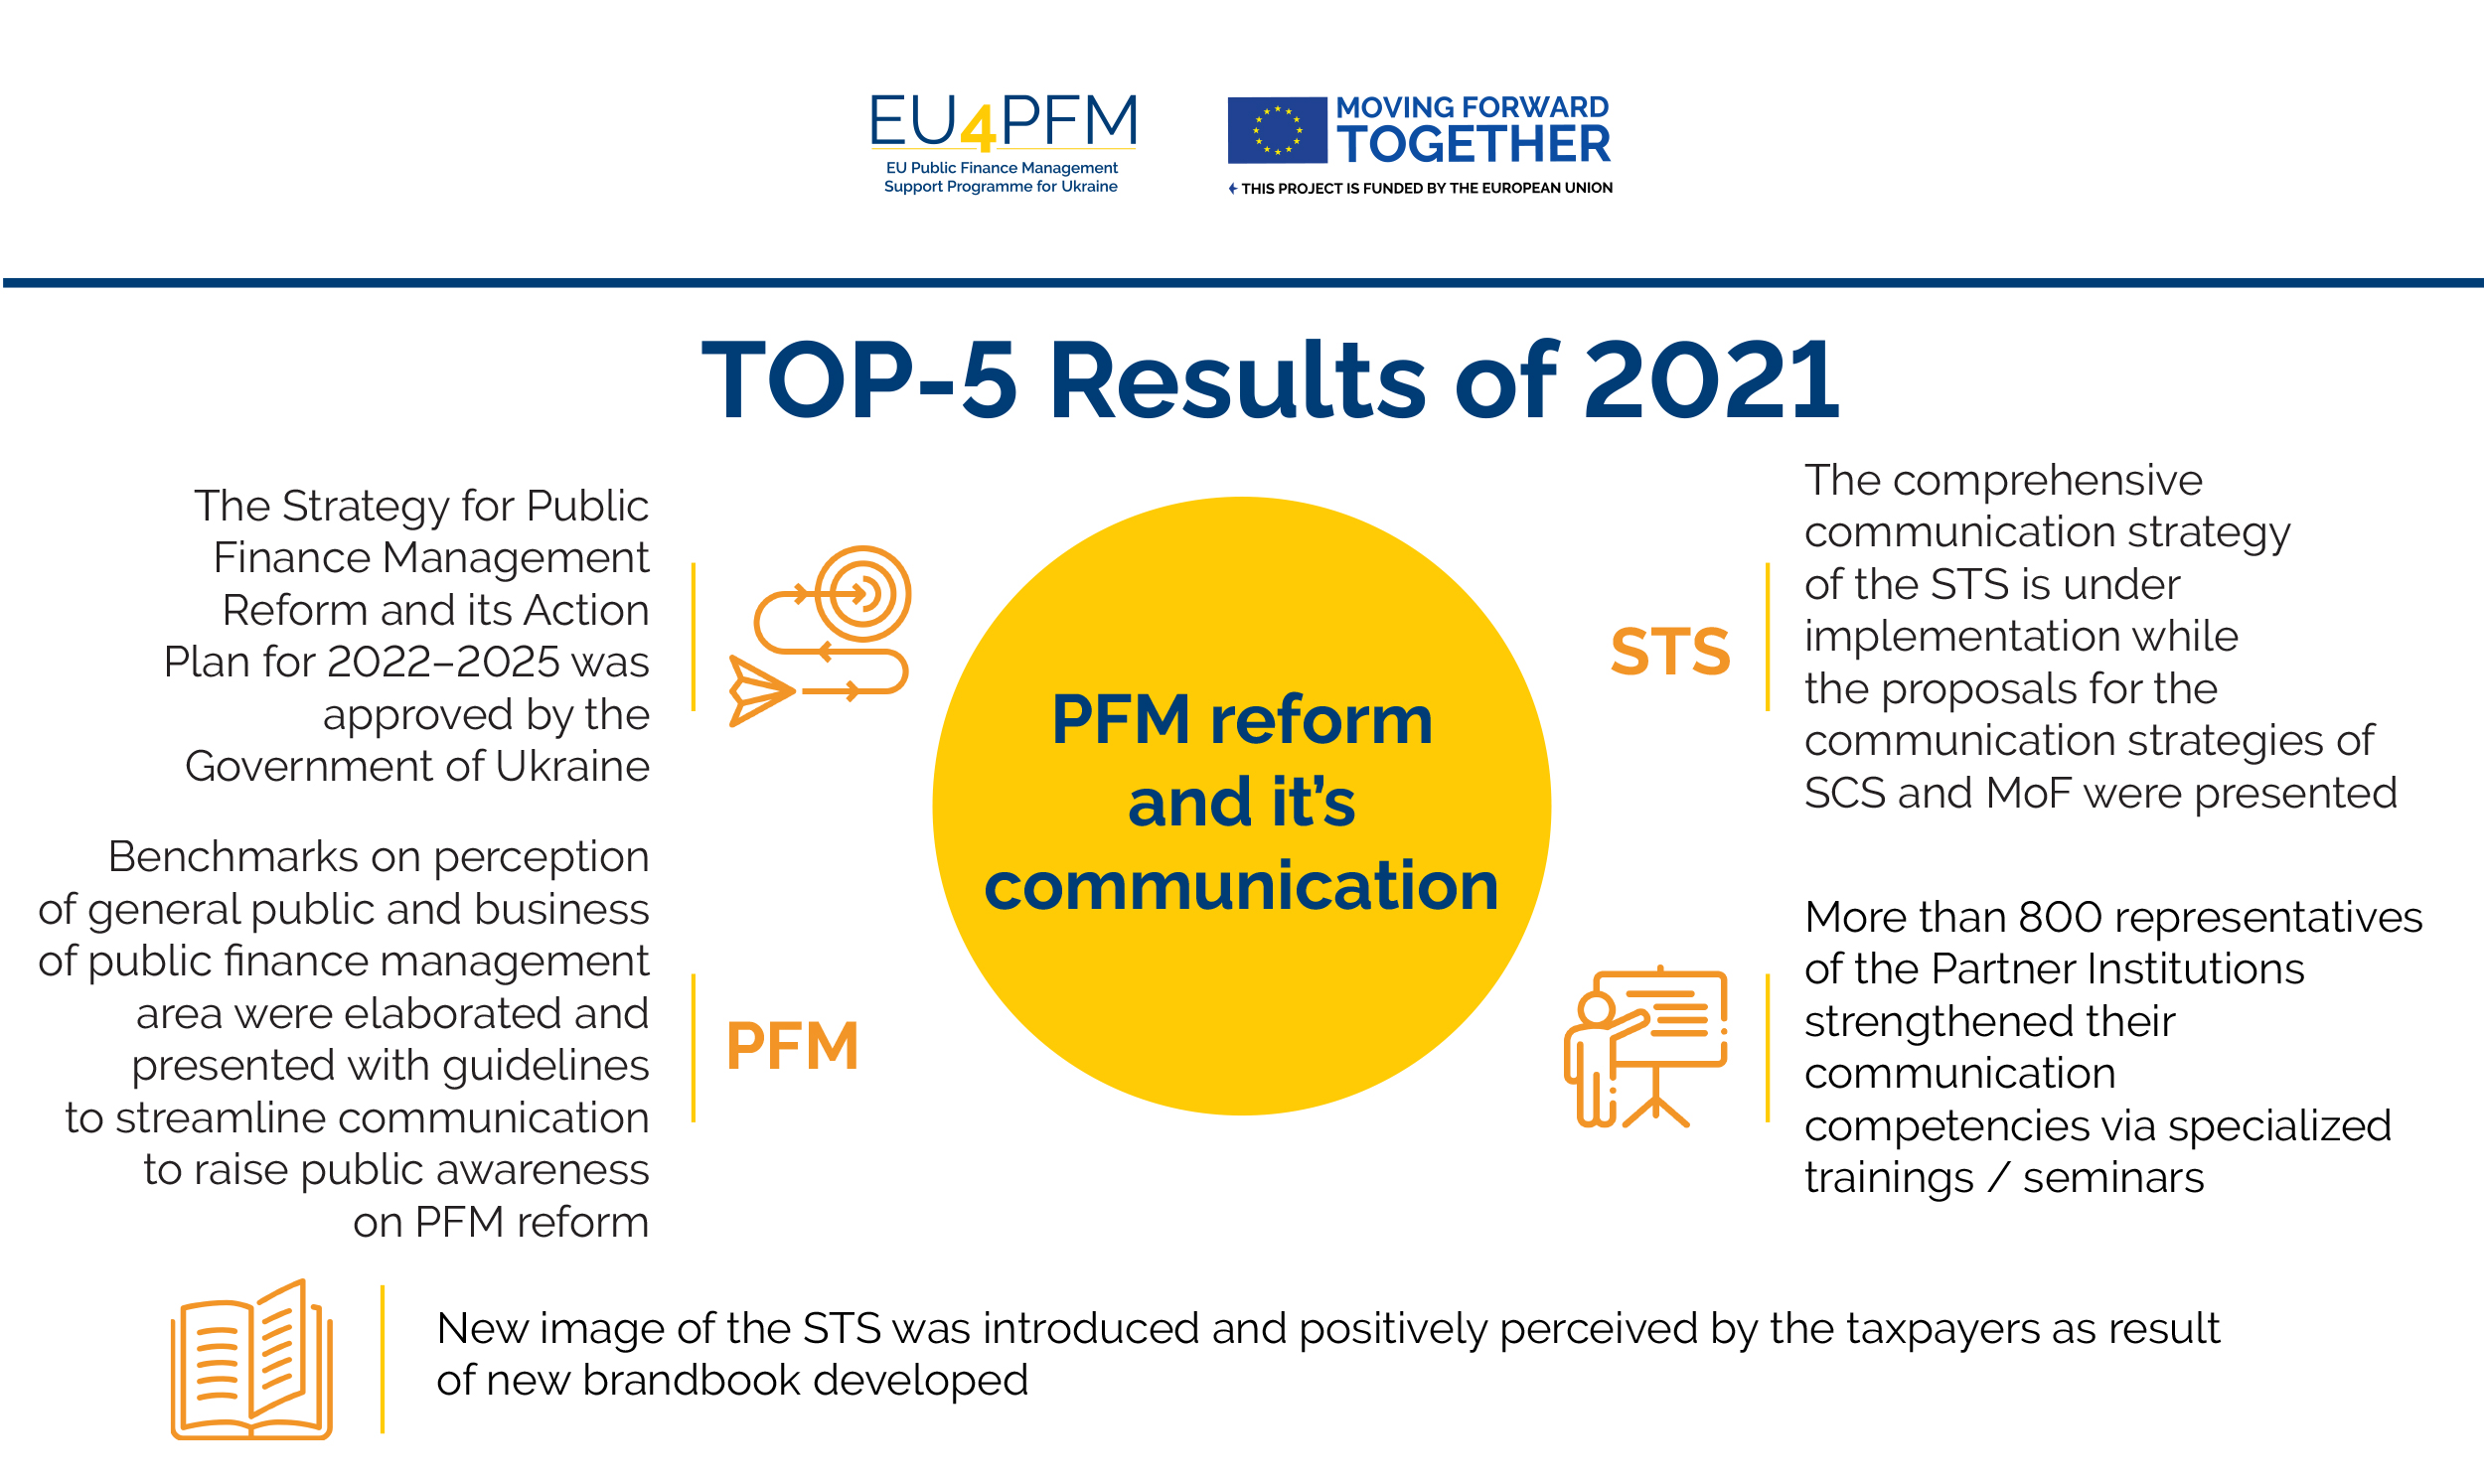 2021 Results: TOP-5 results in PFM and communication stream